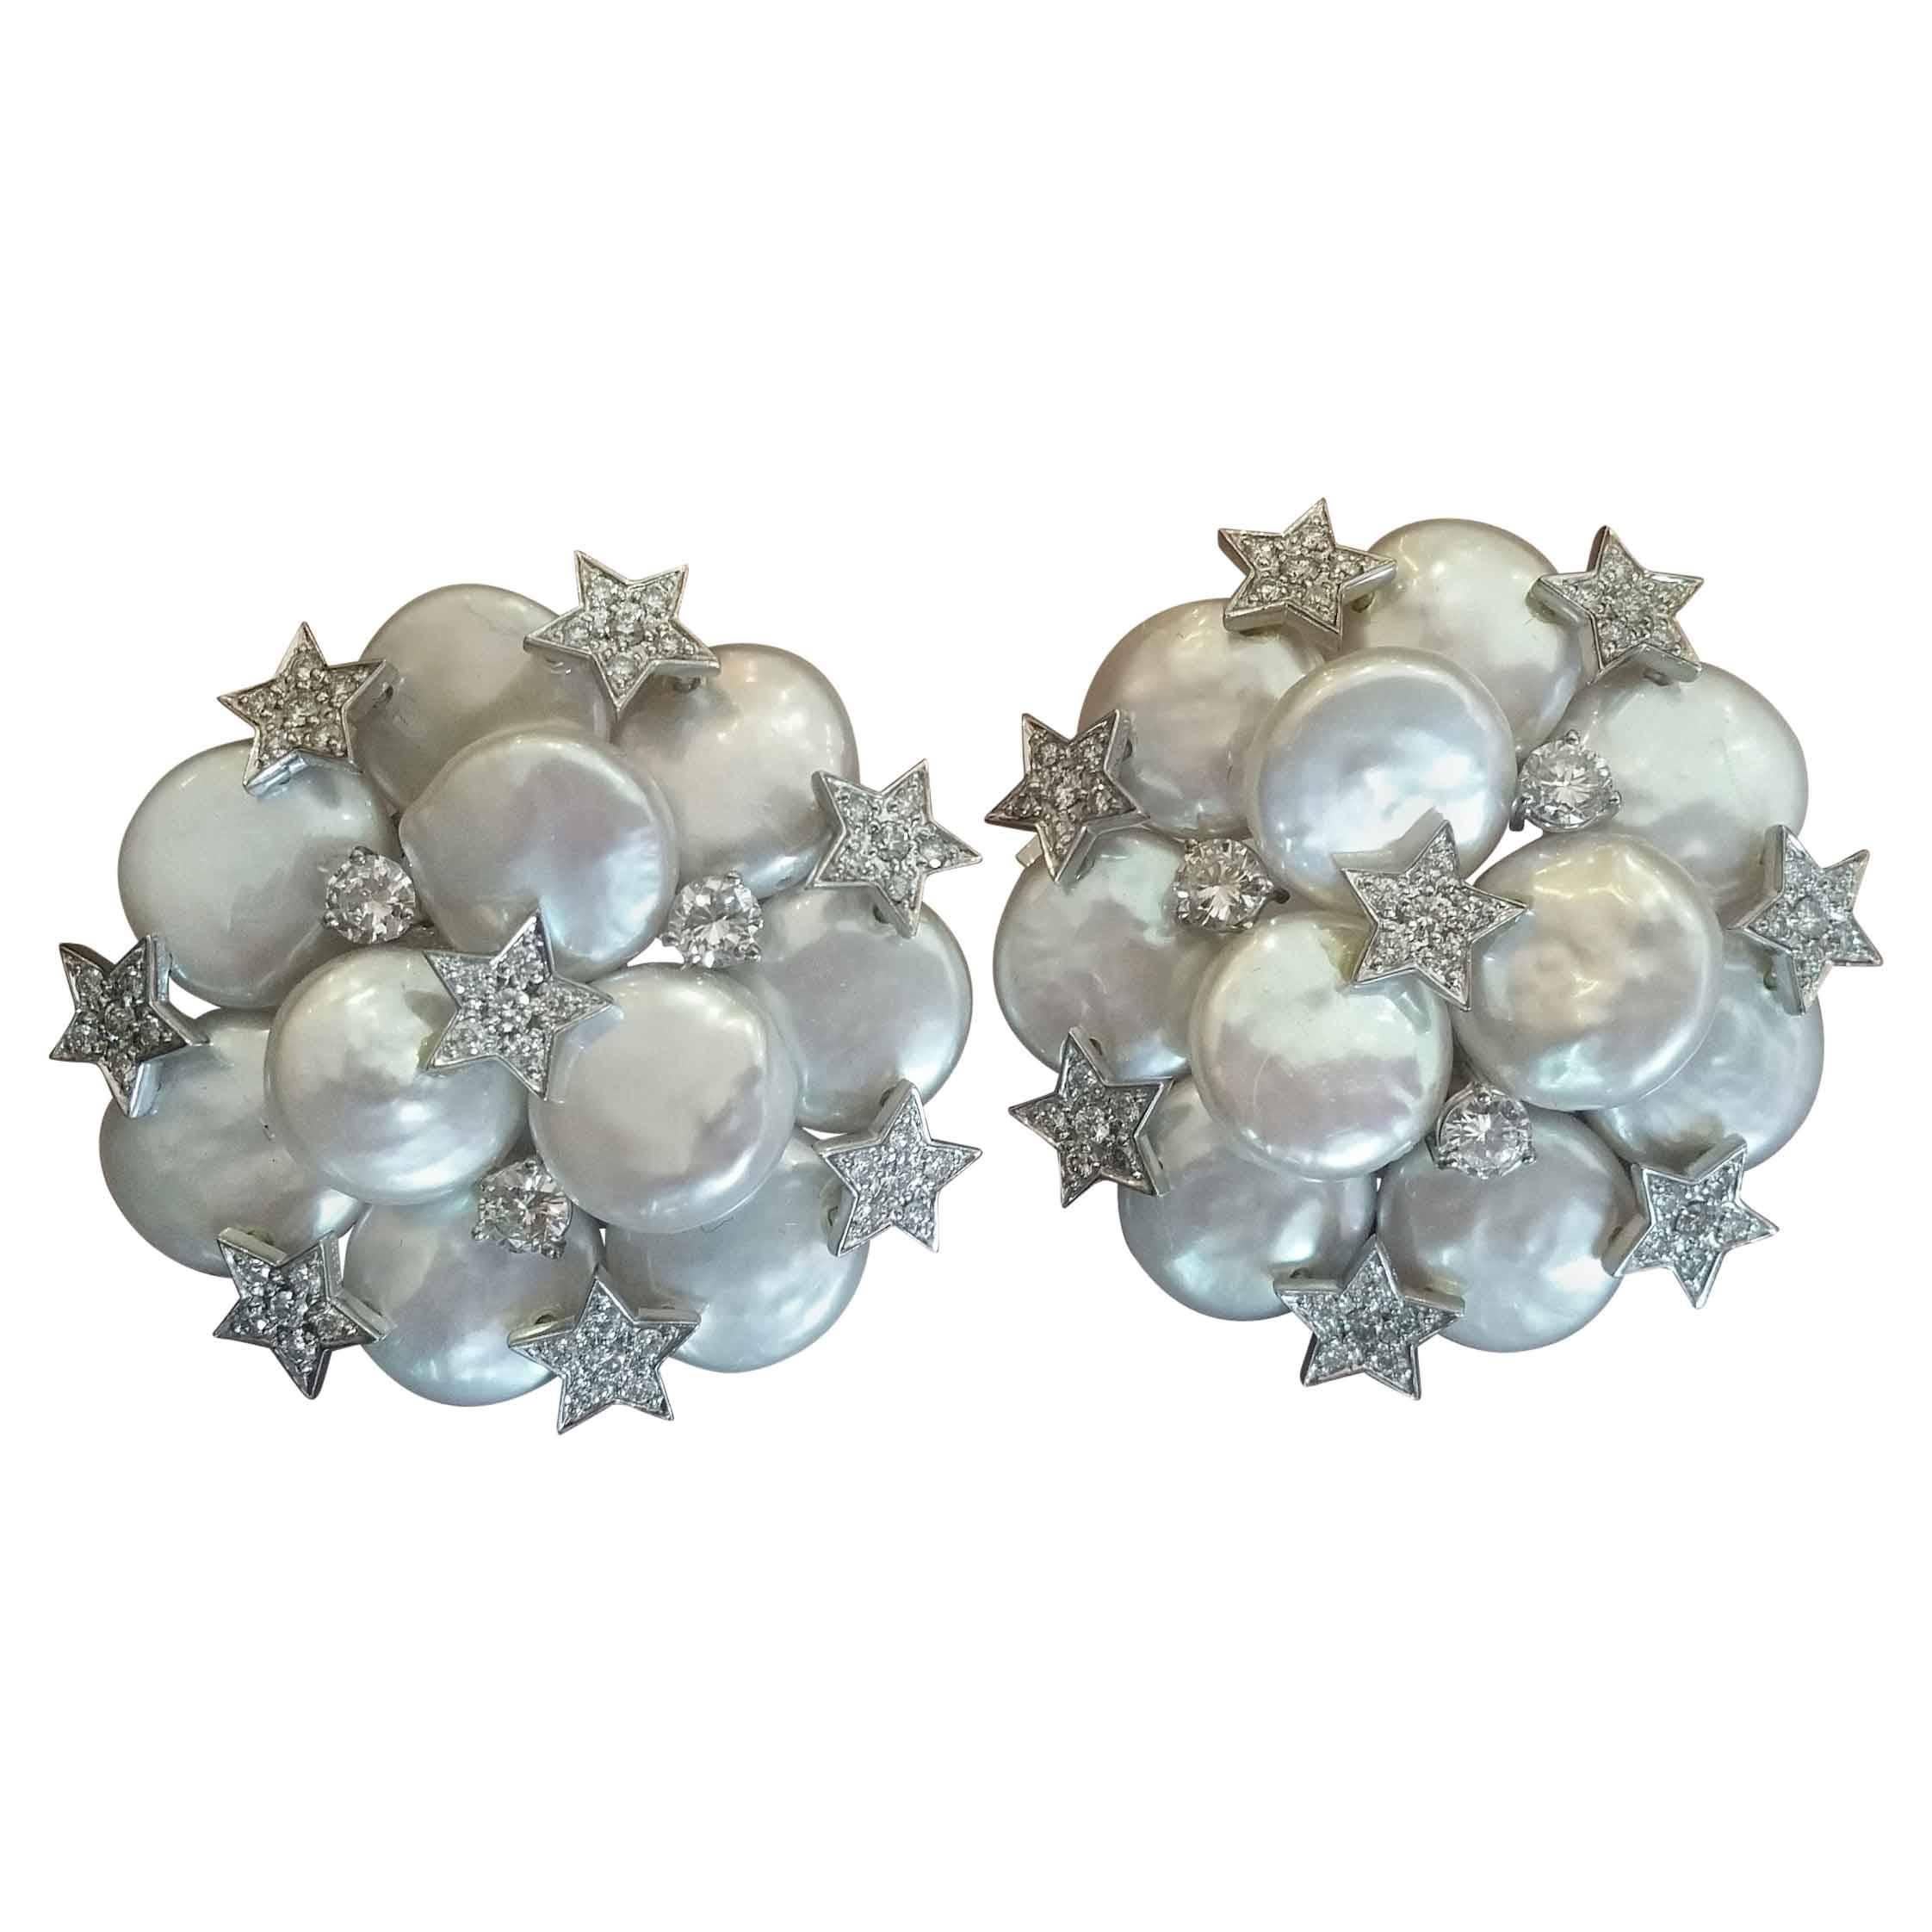  Button Pearl Diamond Gold Cluster Earrings with Diamond Stars